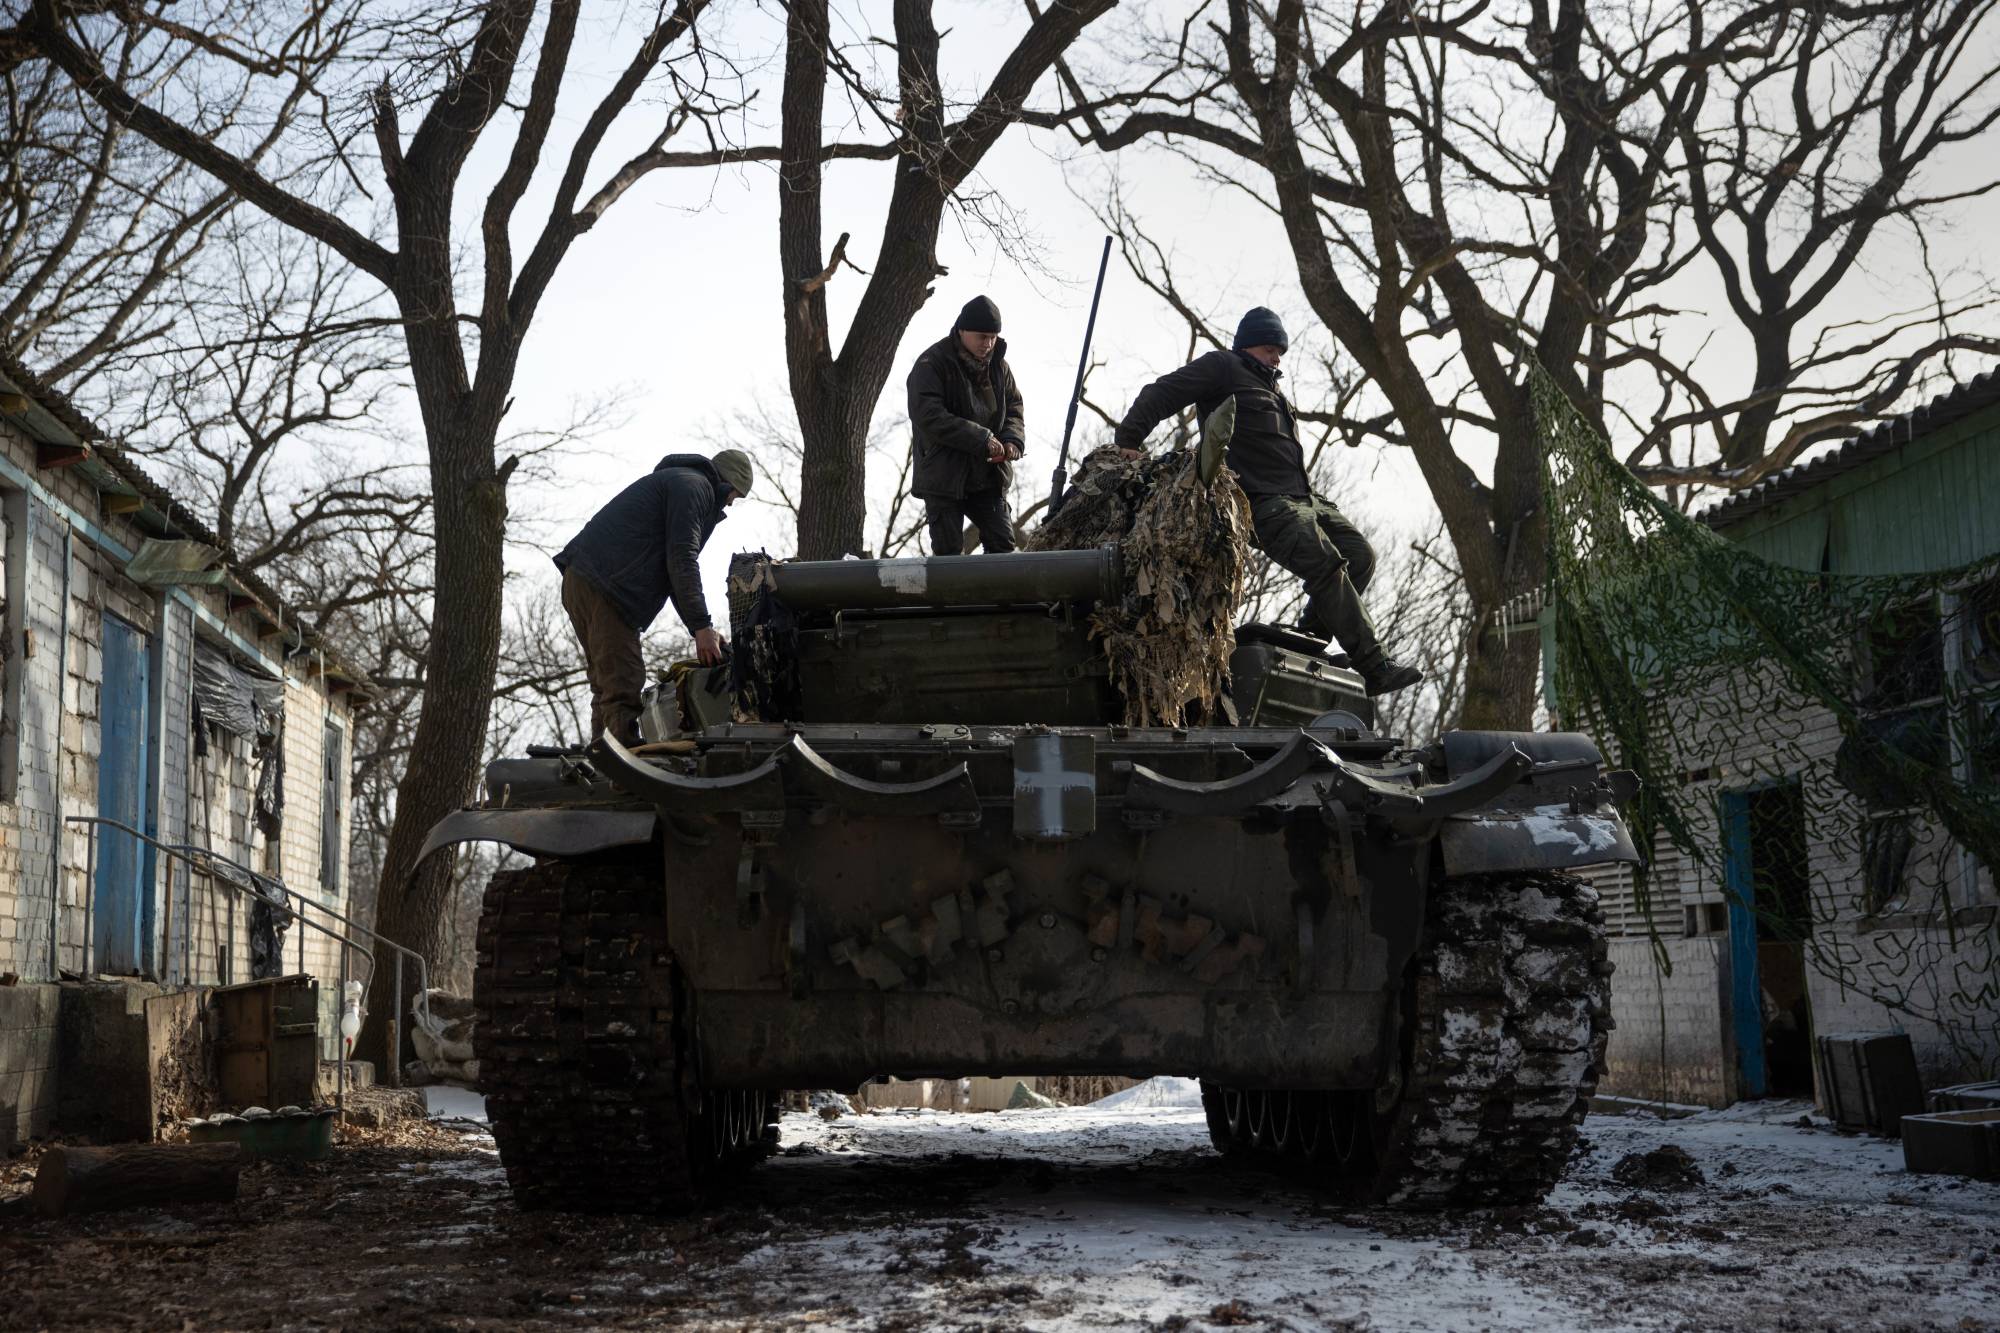 A tank repair unit working in the Donbas region of Ukraine on Friday | TYLER HICKS / THE NEW YORK TIMES